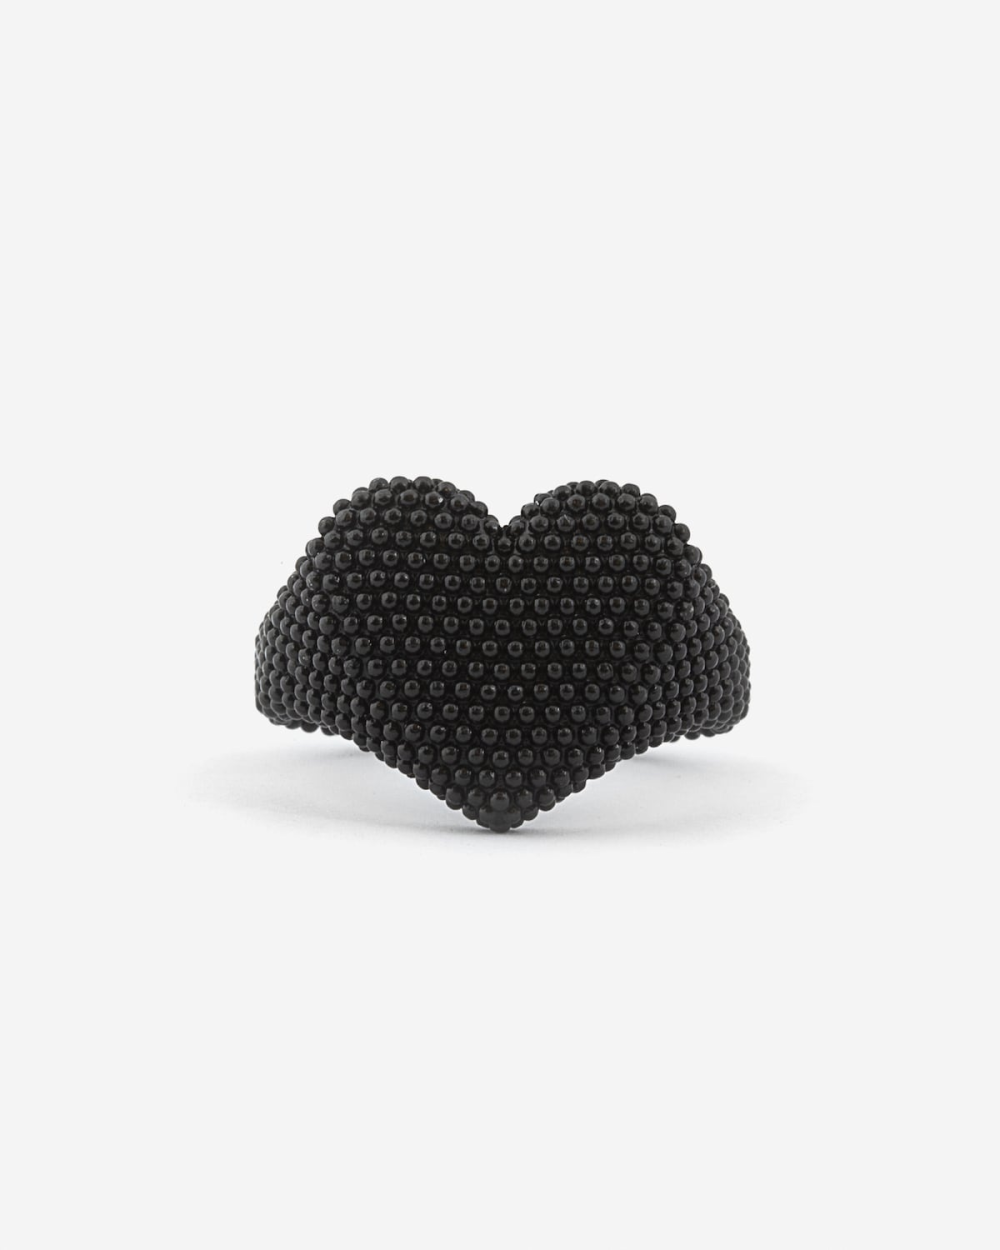 TOTAL BLACK DOTTED HEART SIGNET RING